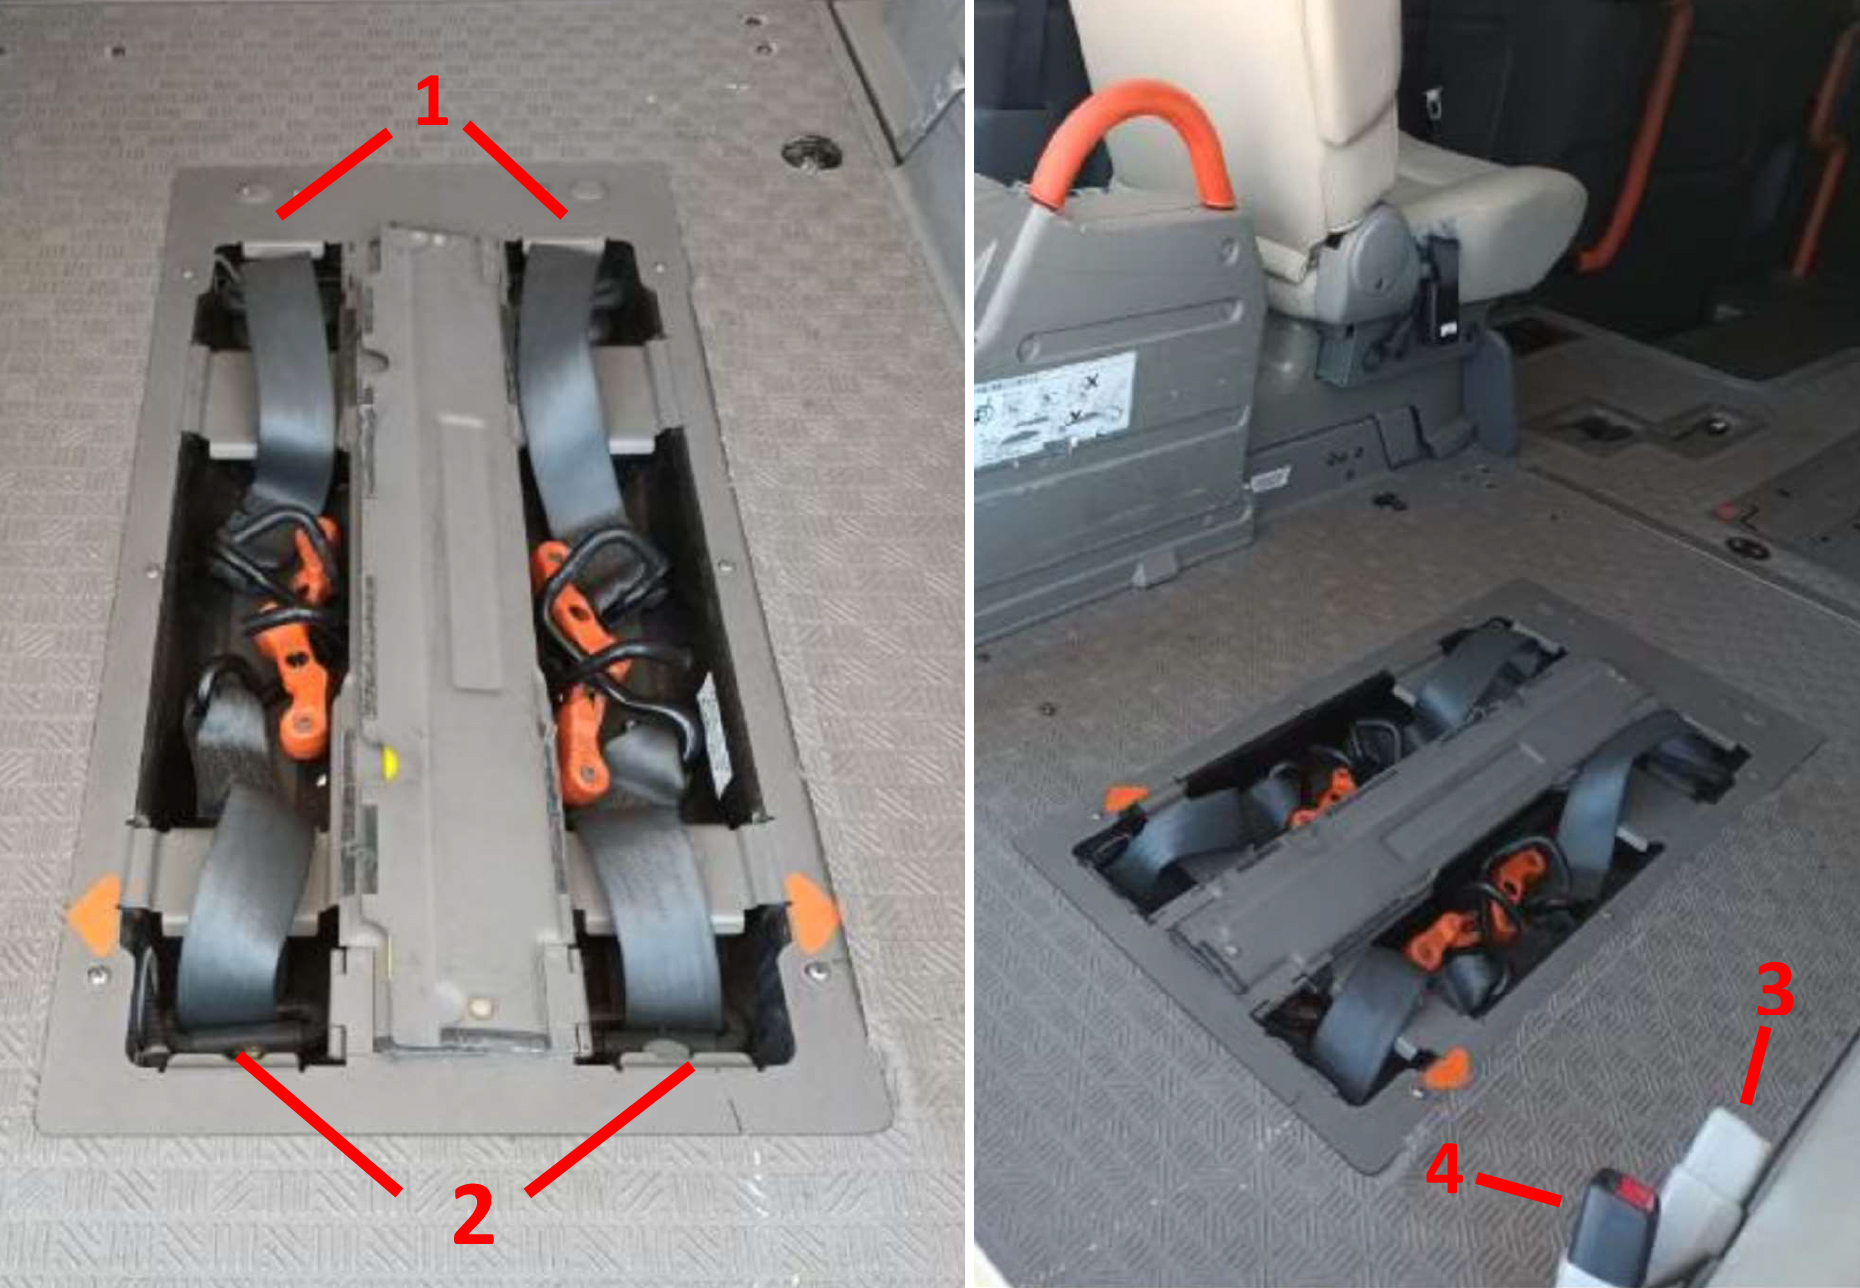 This is a composite image of two images displayed side by side showing the wheelchair restraint system installed in a vehicle. The leftside image shows four restraint points for the wheelchair wheels. The rightside image shows two restraint points, similar to a normal seatbelt restraint, for the shoulder and lap restraint.